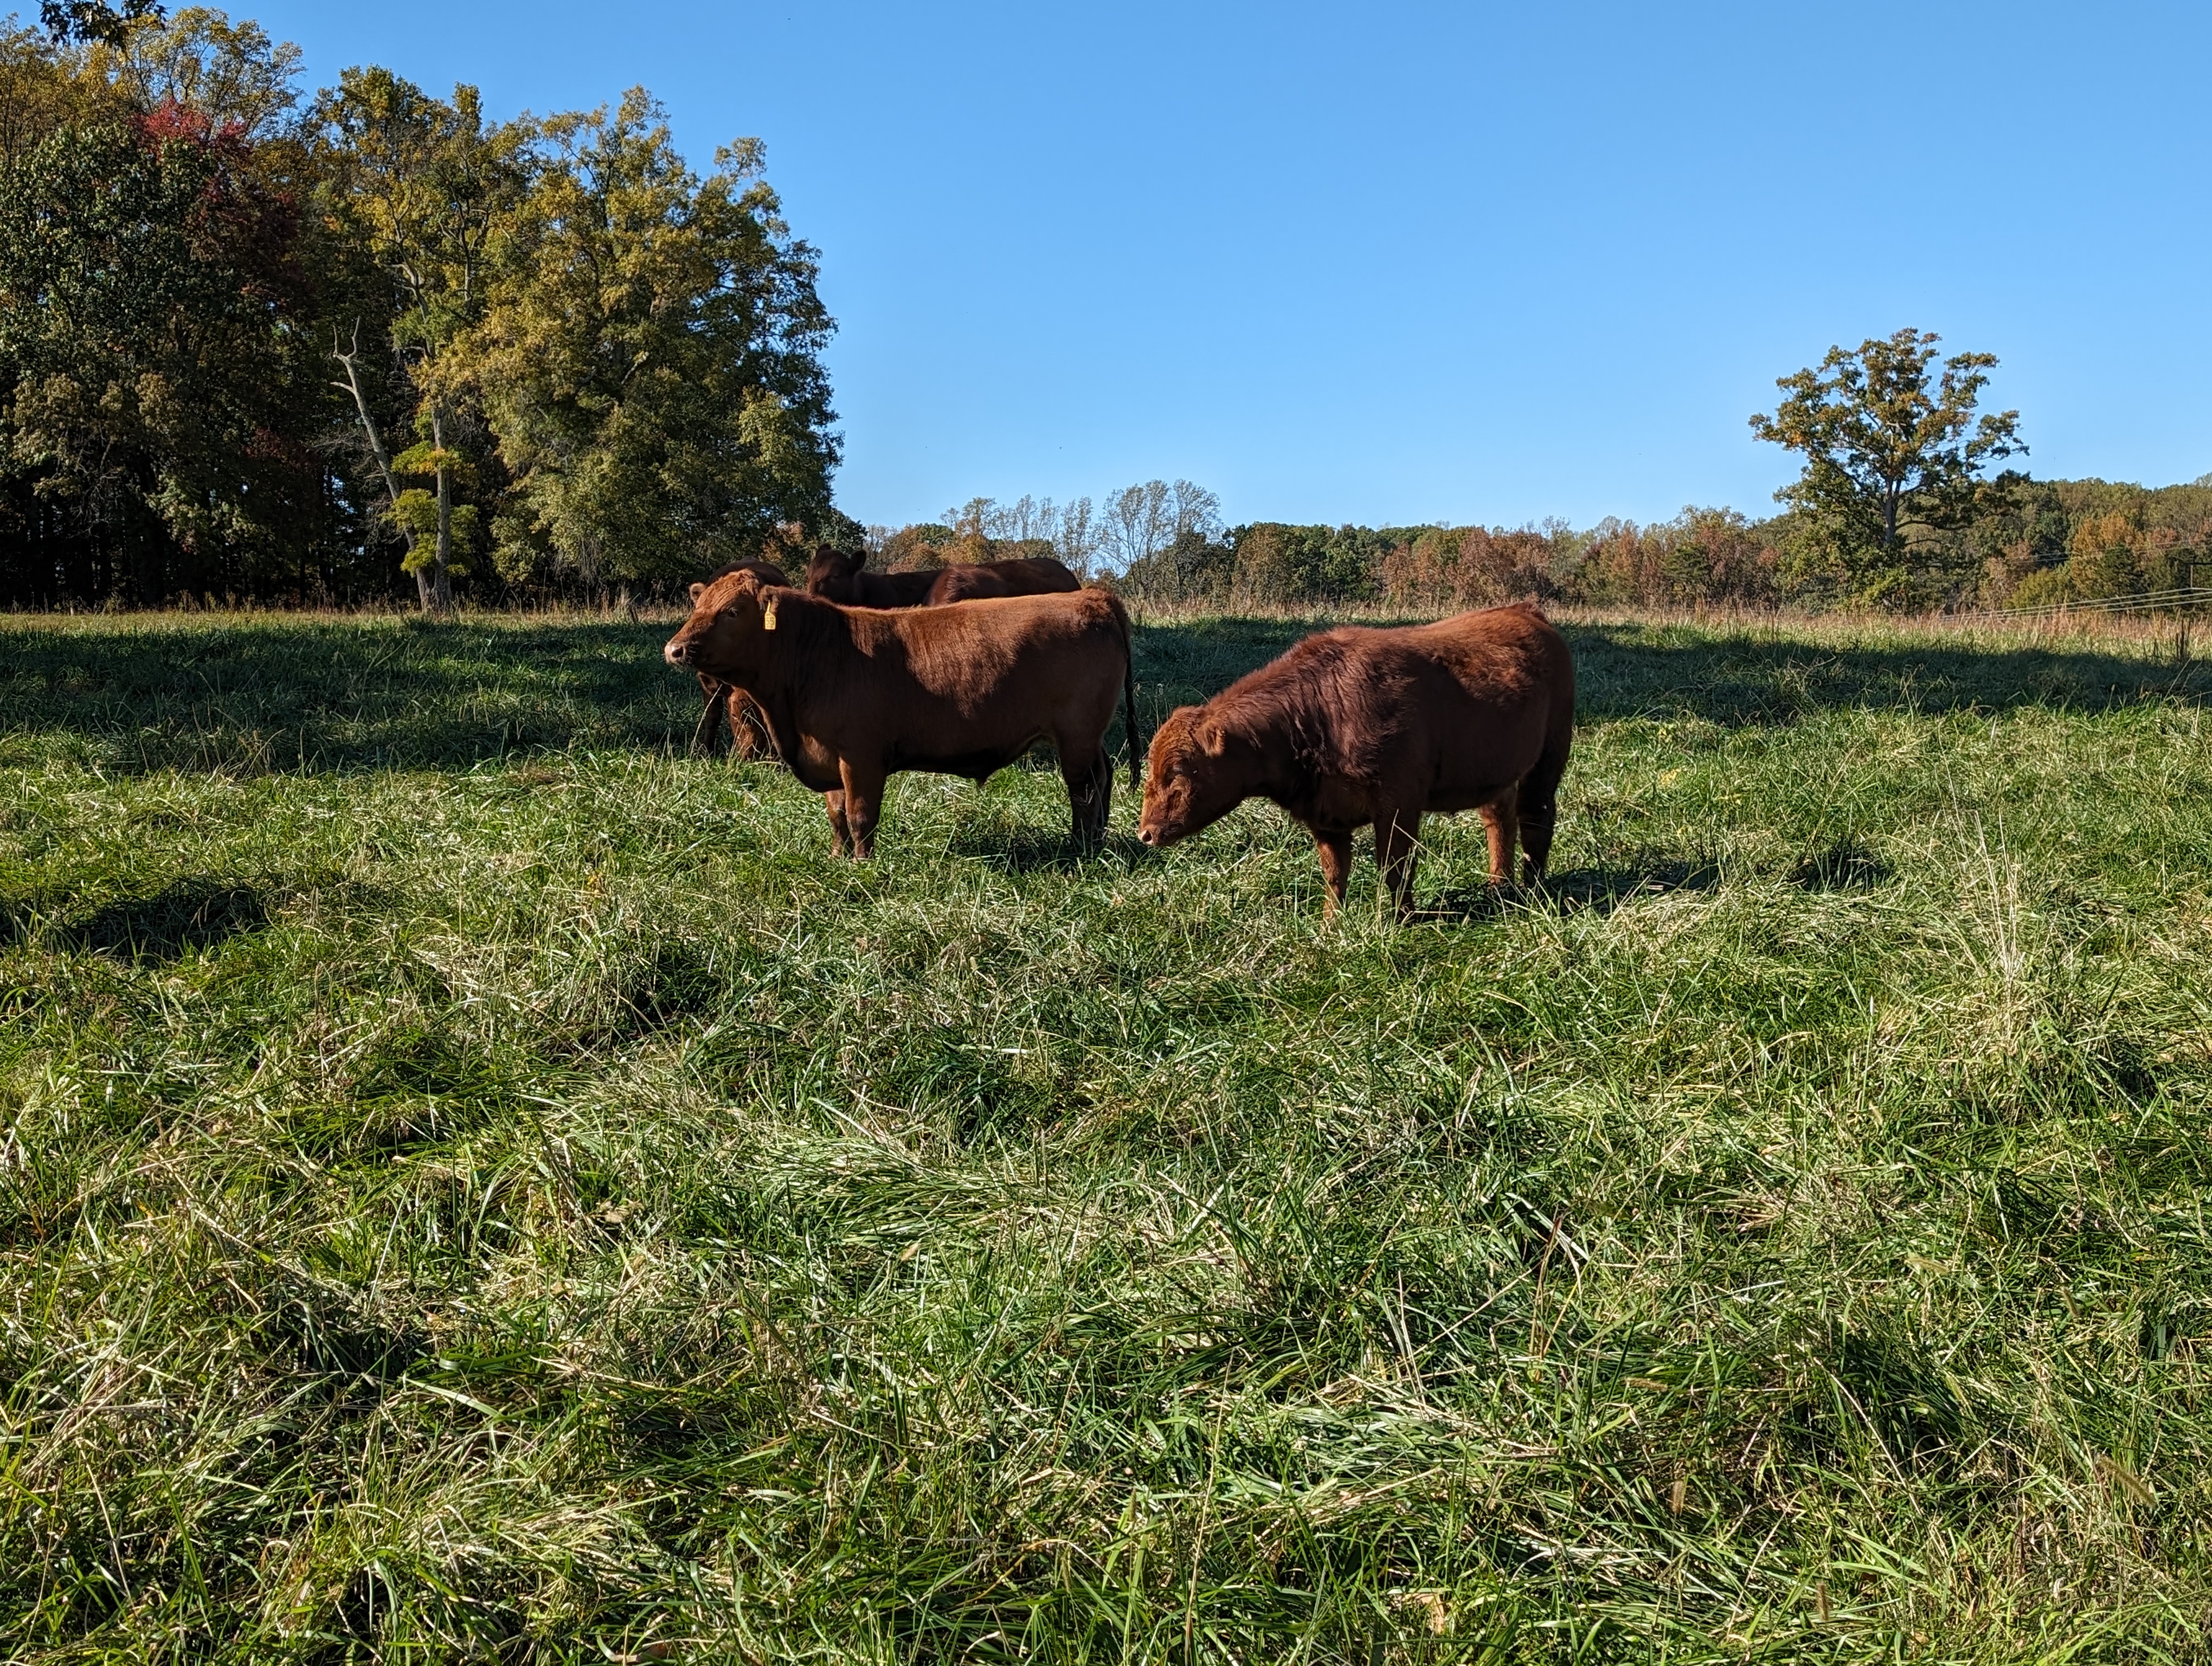 Two cows grazing in a pasture.